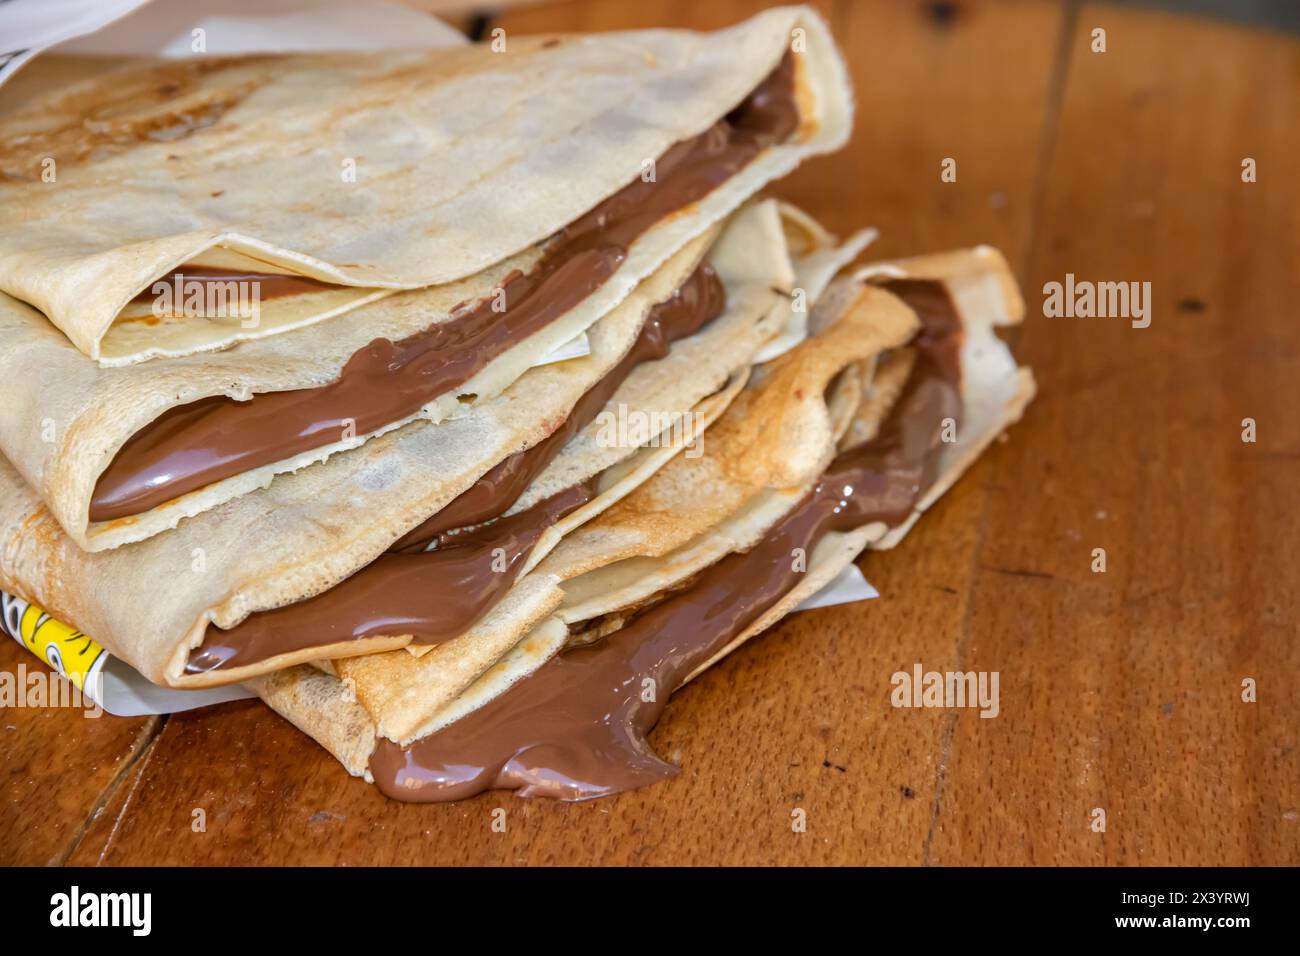 Bunch of home made pancakes filled with dripping melted hot chocolate, chocolate drips down the wooden table out of the pancakes Stock Photo